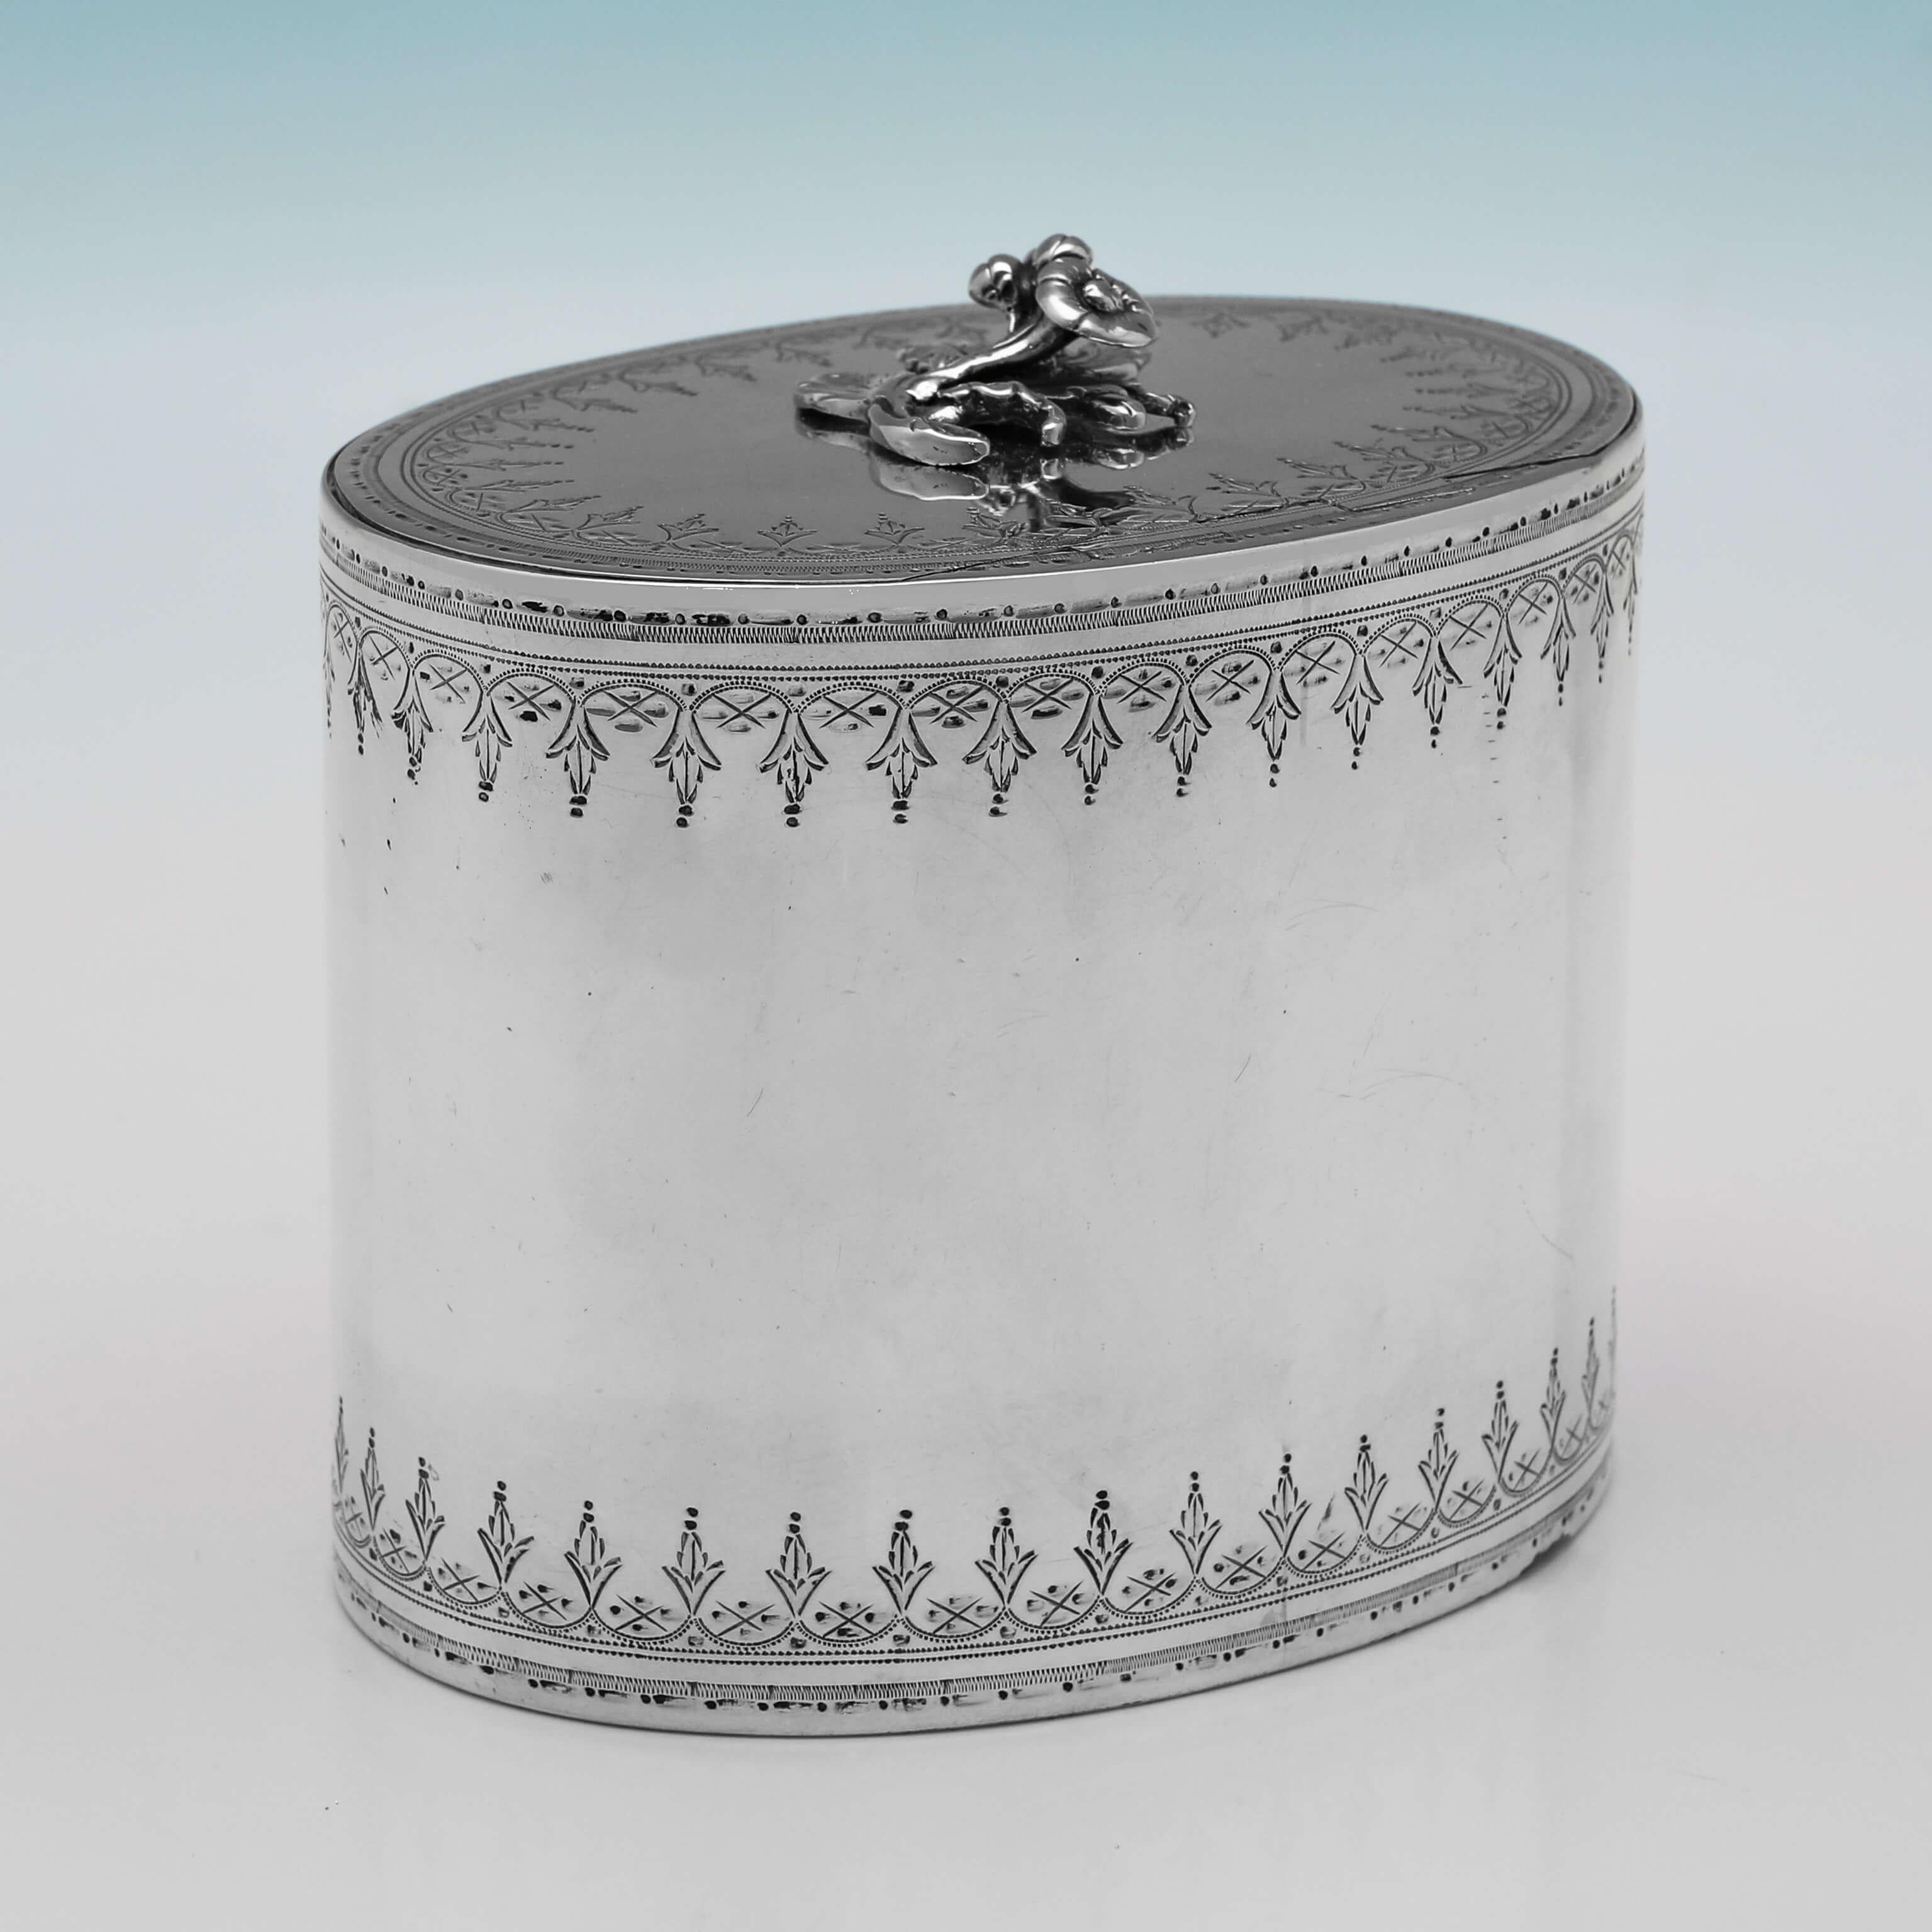 Early 19th Century Stunning Engraved Neoclassical Antique Sterling Silver Tea Caddy - London 1806 For Sale